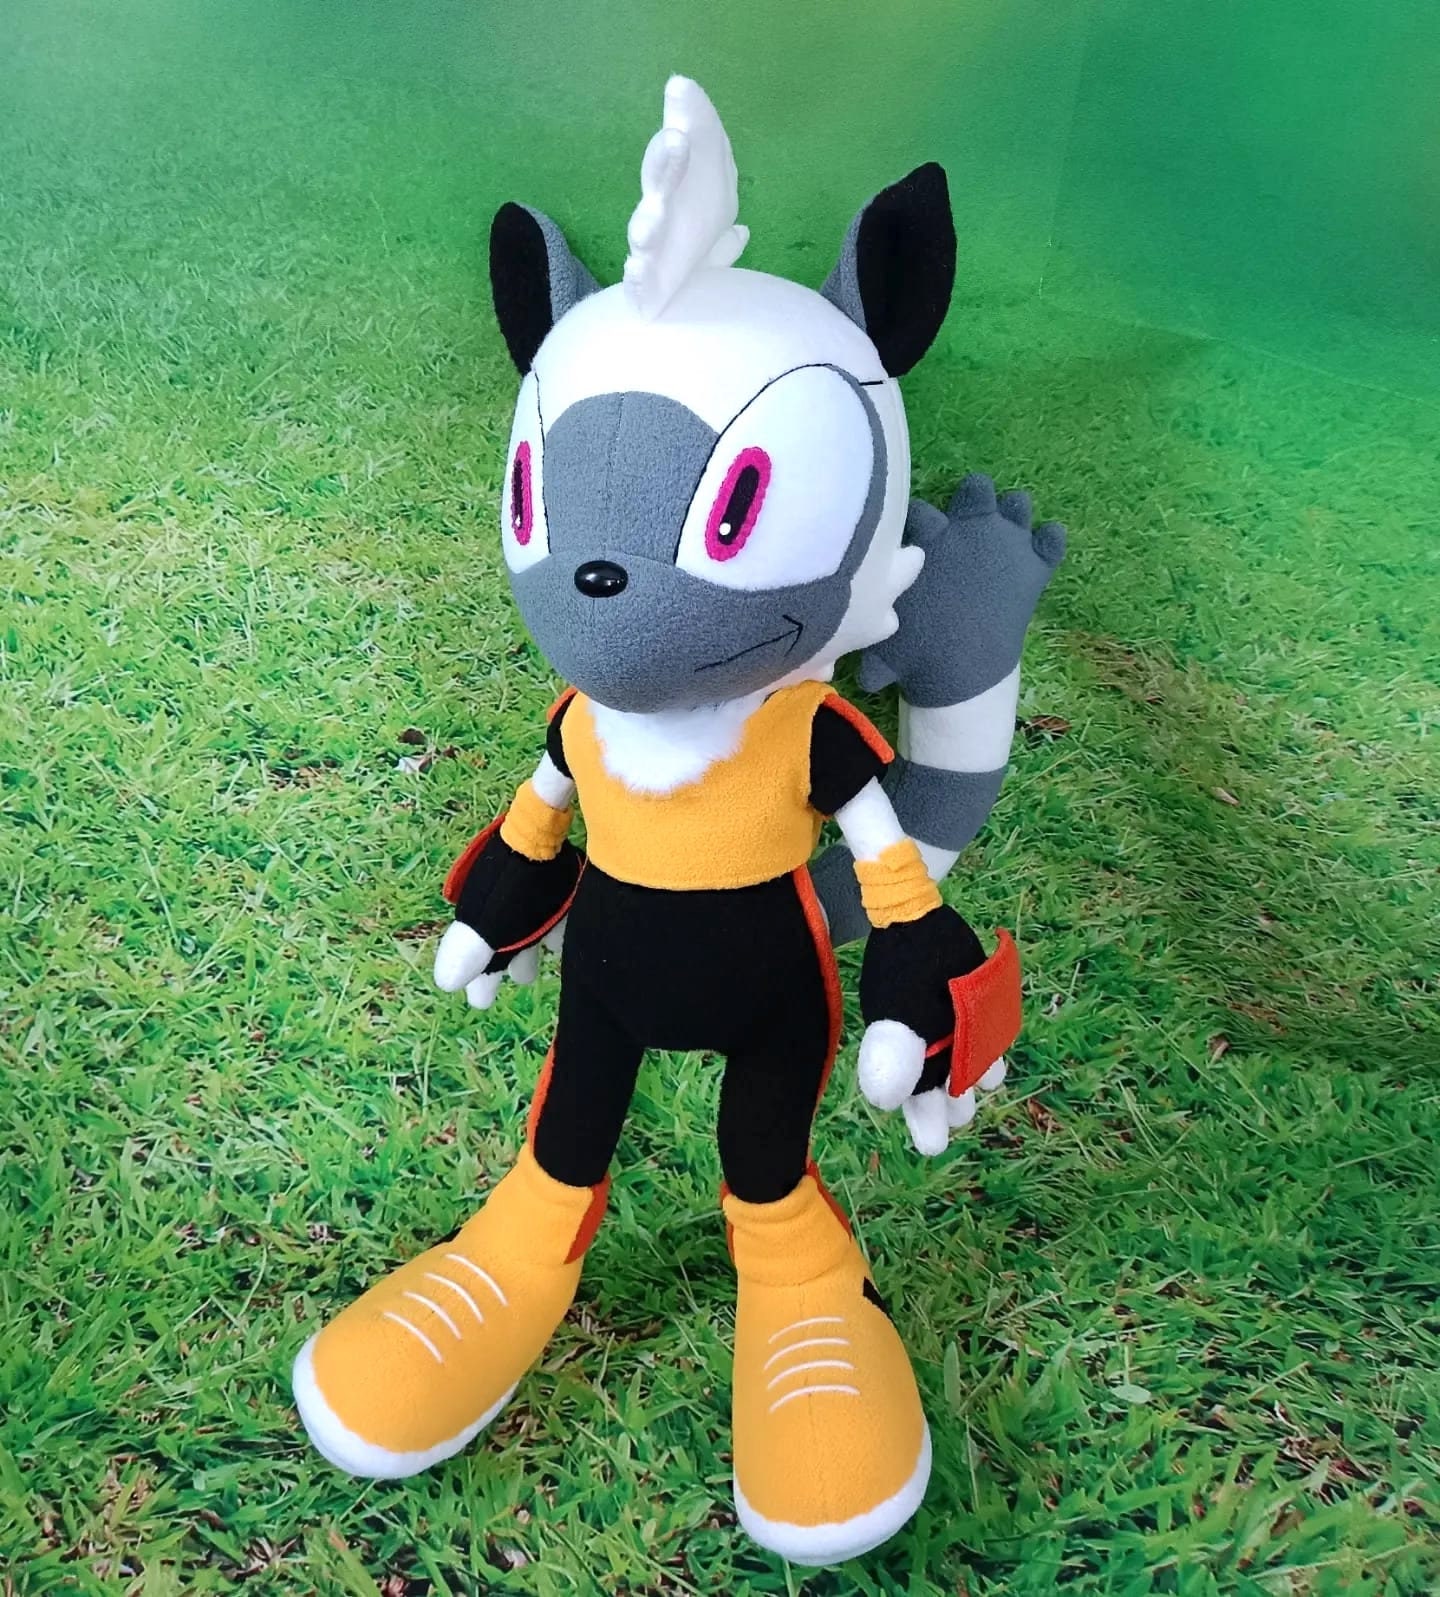  11.8 Inch Tails.EXE Plush, Sonic.EXE Plush Toy, Dark Tail and  Bloodtail Plush, Baby Plush Toy Gift for Boys Girls or Fans : Toys & Games